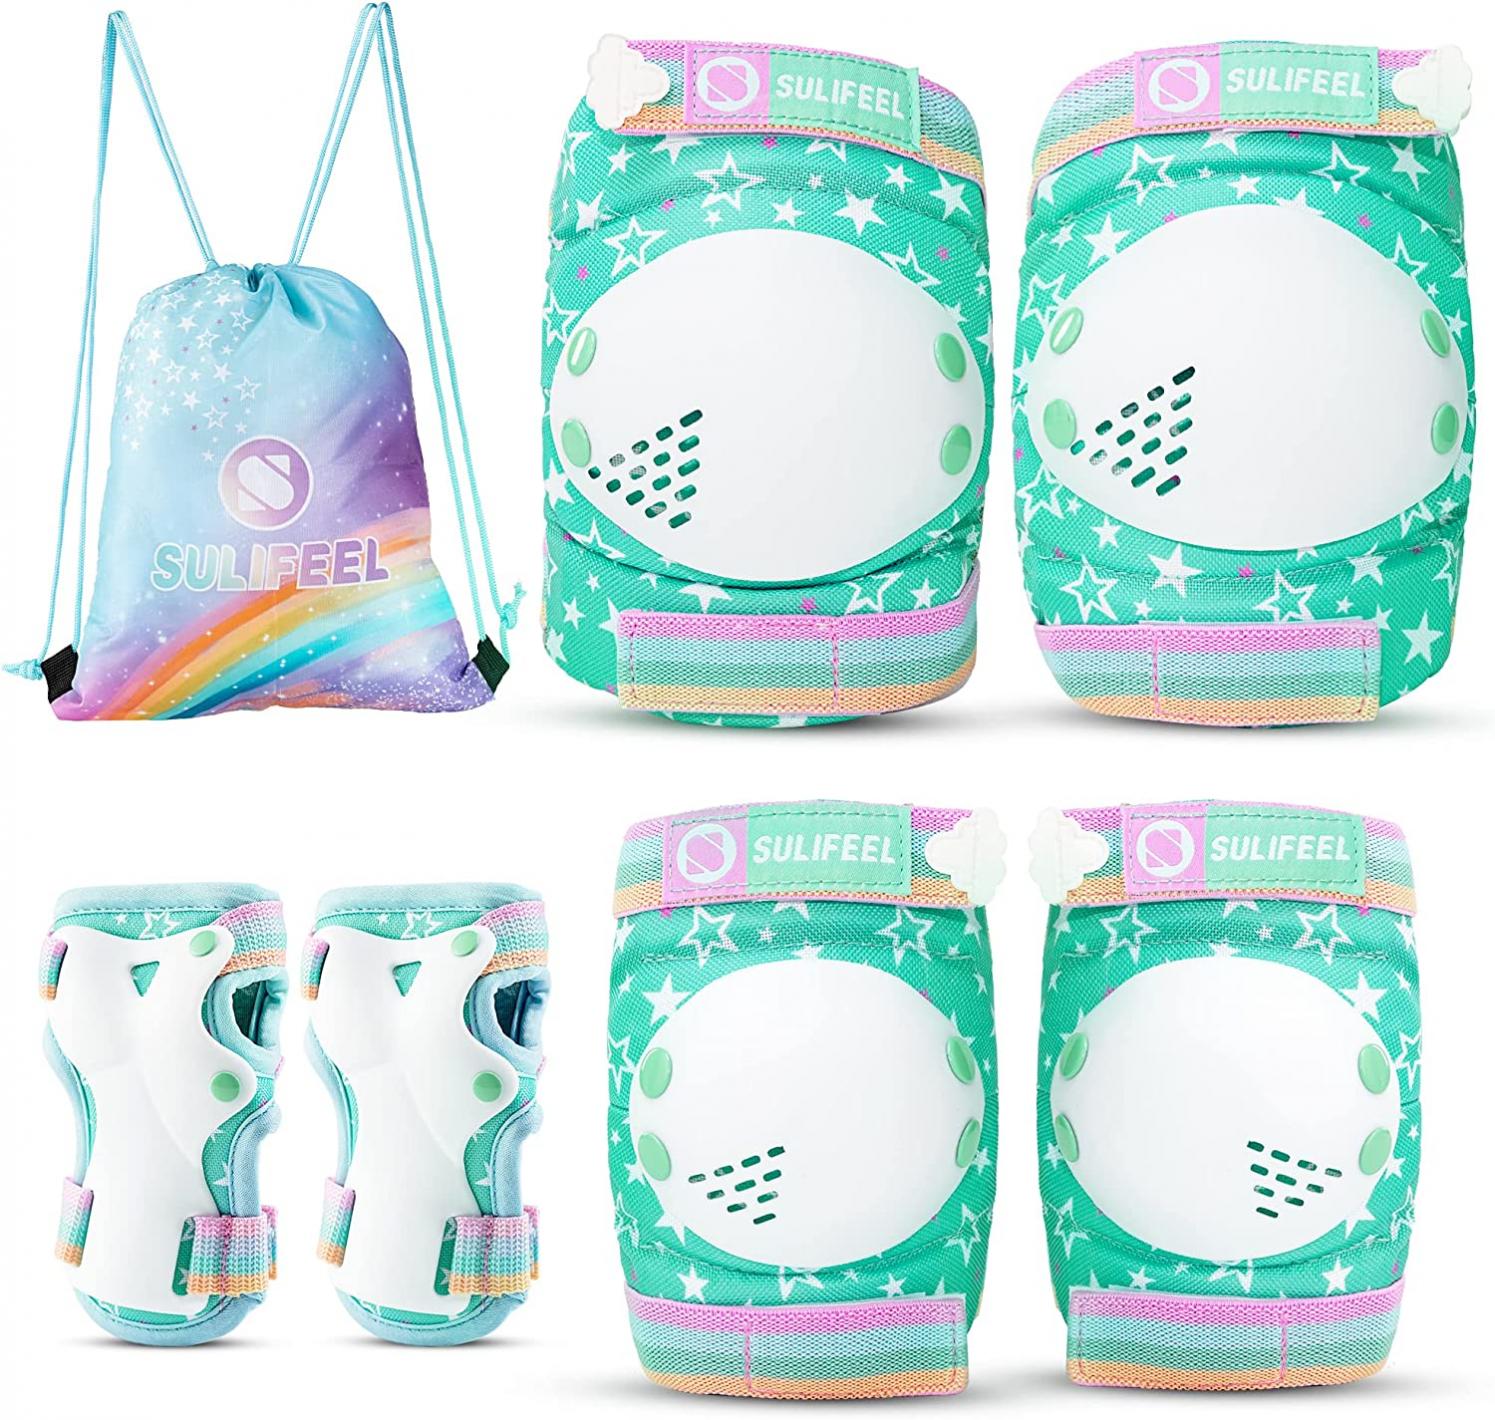 SULIFEEL Rainbow Unicorn Knee Pads for Kids Knee Elbow Pads Wrist Guards with Drawstring Bag Adjustable Protective Gear Set for Girls Boys Green Medium